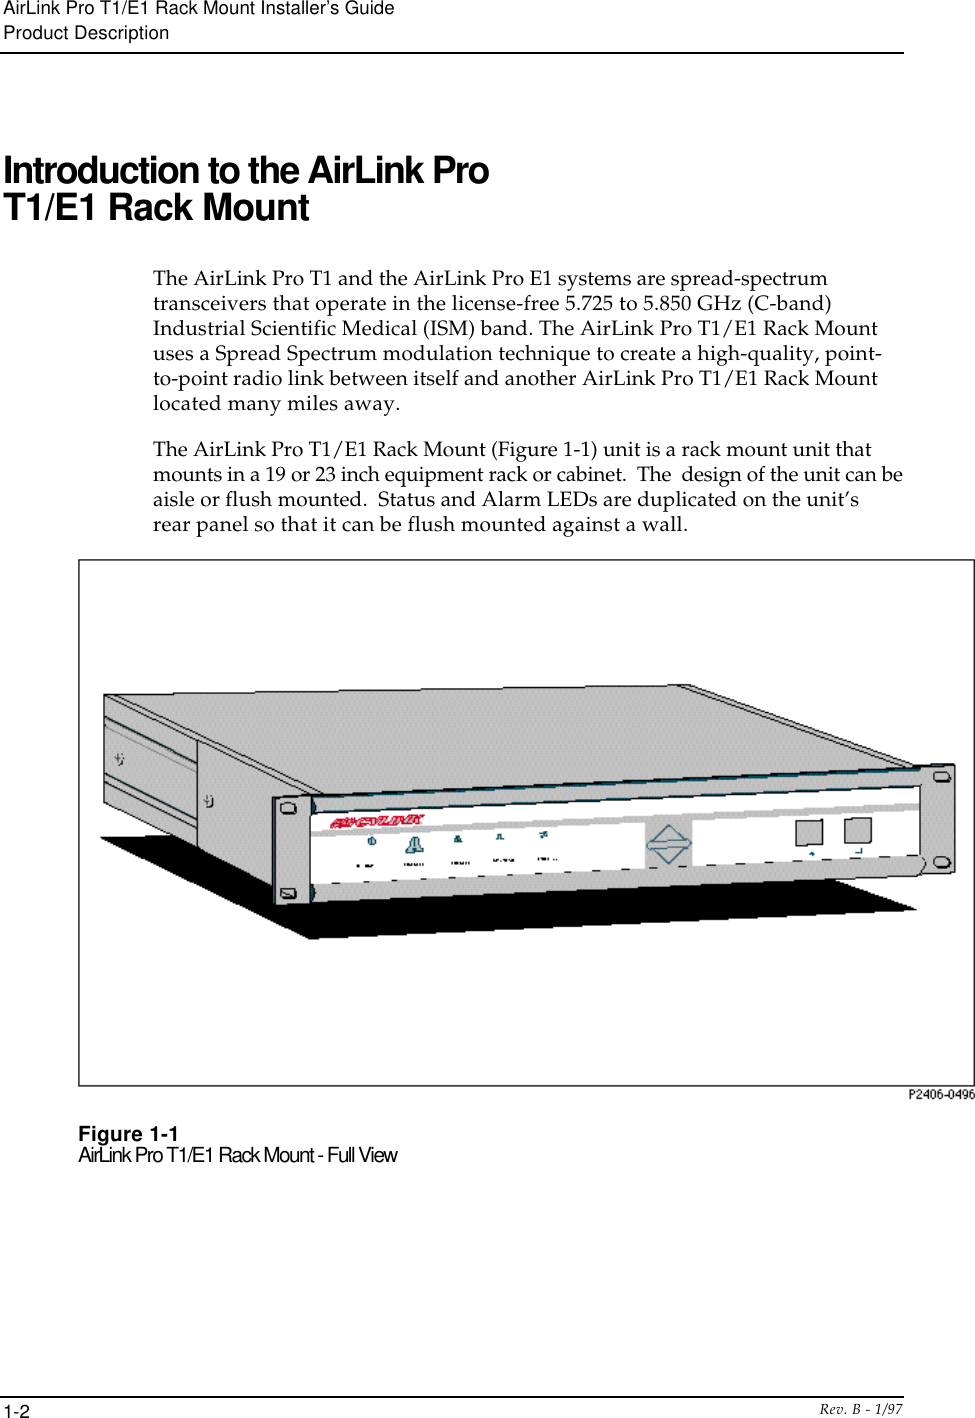 AirLink Pro T1/E1 Rack Mount Installer’s GuideProduct DescriptionRev. B - 1/971-2Introduction to the AirLink ProT1/E1 Rack MountThe AirLink Pro T1 and the AirLink Pro E1 systems are spread-spectrumtransceivers that operate in the license-free 5.725 to 5.850 GHz (C-band)Industrial Scientific Medical (ISM) band. The AirLink Pro T1/E1 Rack Mountuses a Spread Spectrum modulation technique to create a high-quality, point-to-point radio link between itself and another AirLink Pro T1/E1 Rack Mountlocated many miles away.The AirLink Pro T1/E1 Rack Mount (Figure 1-1) unit is a rack mount unit thatmounts in a 19 or 23 inch equipment rack or cabinet.  The  design of the unit can beaisle or flush mounted.  Status and Alarm LEDs are duplicated on the unit’srear panel so that it can be flush mounted against a wall.Figure 1-1AirLink Pro T1/E1 Rack Mount - Full View